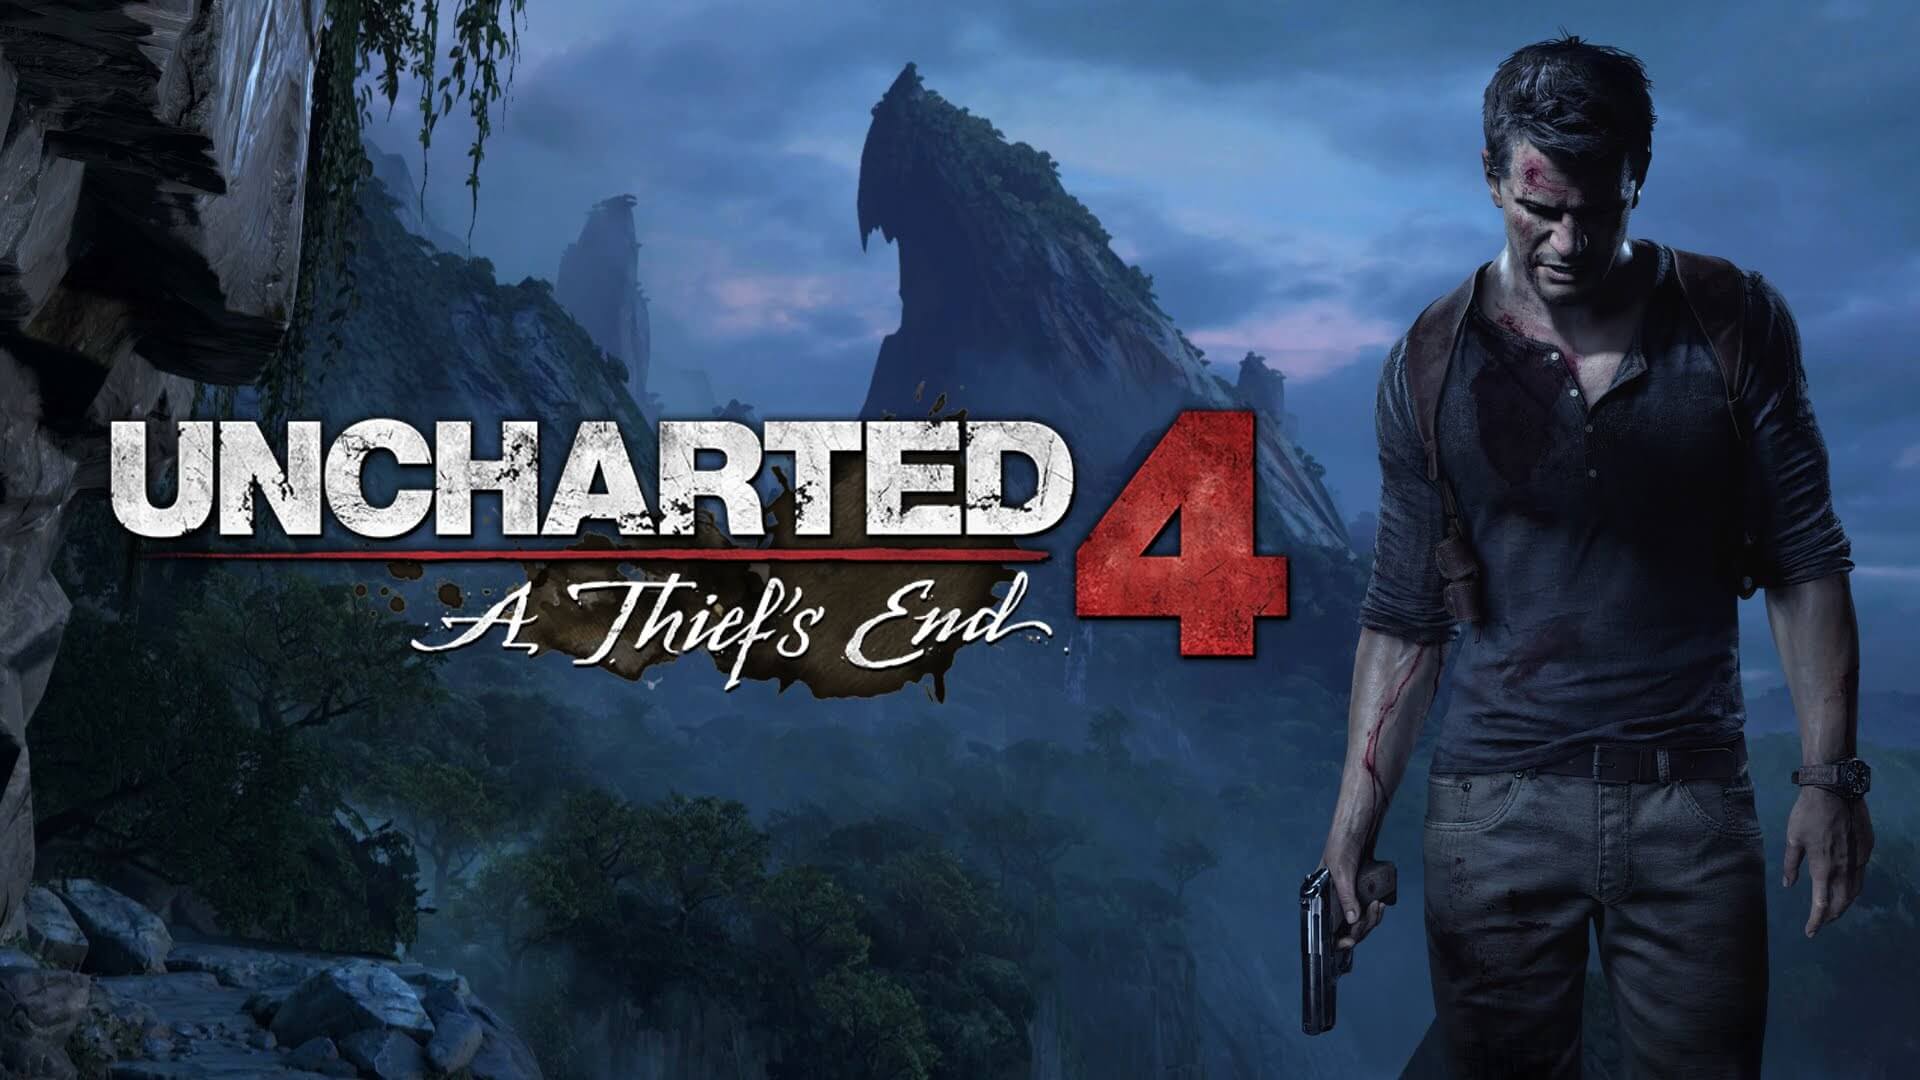 Explore Uncharted 4 on March 18.